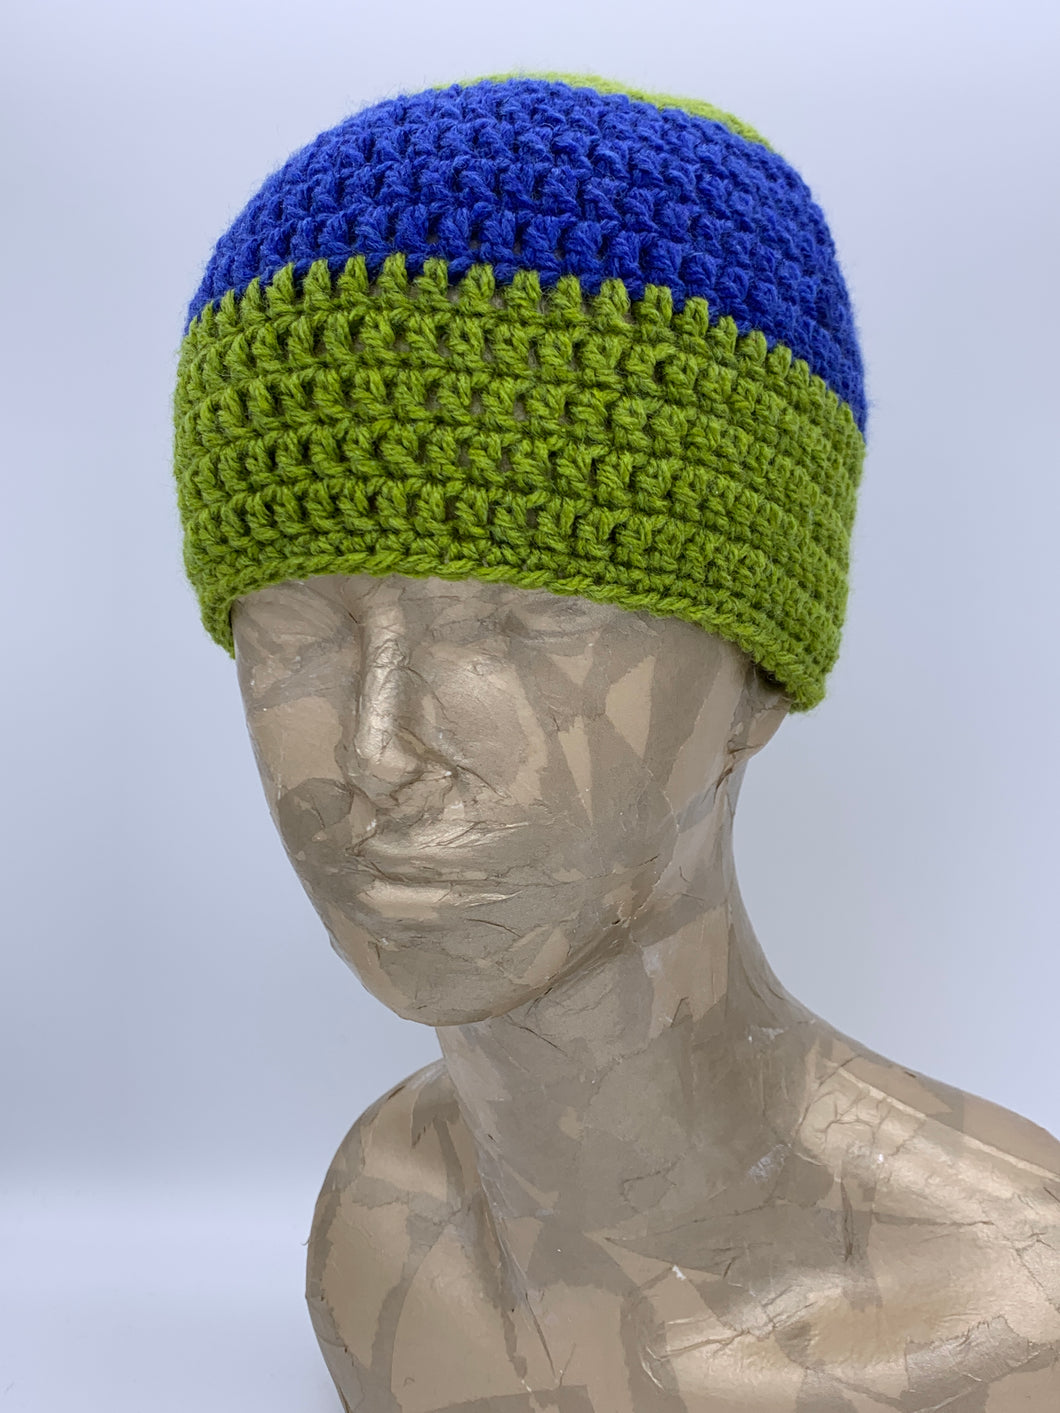 Crochet two tone green and blue beanie hat- Size Child 3-10 yrs